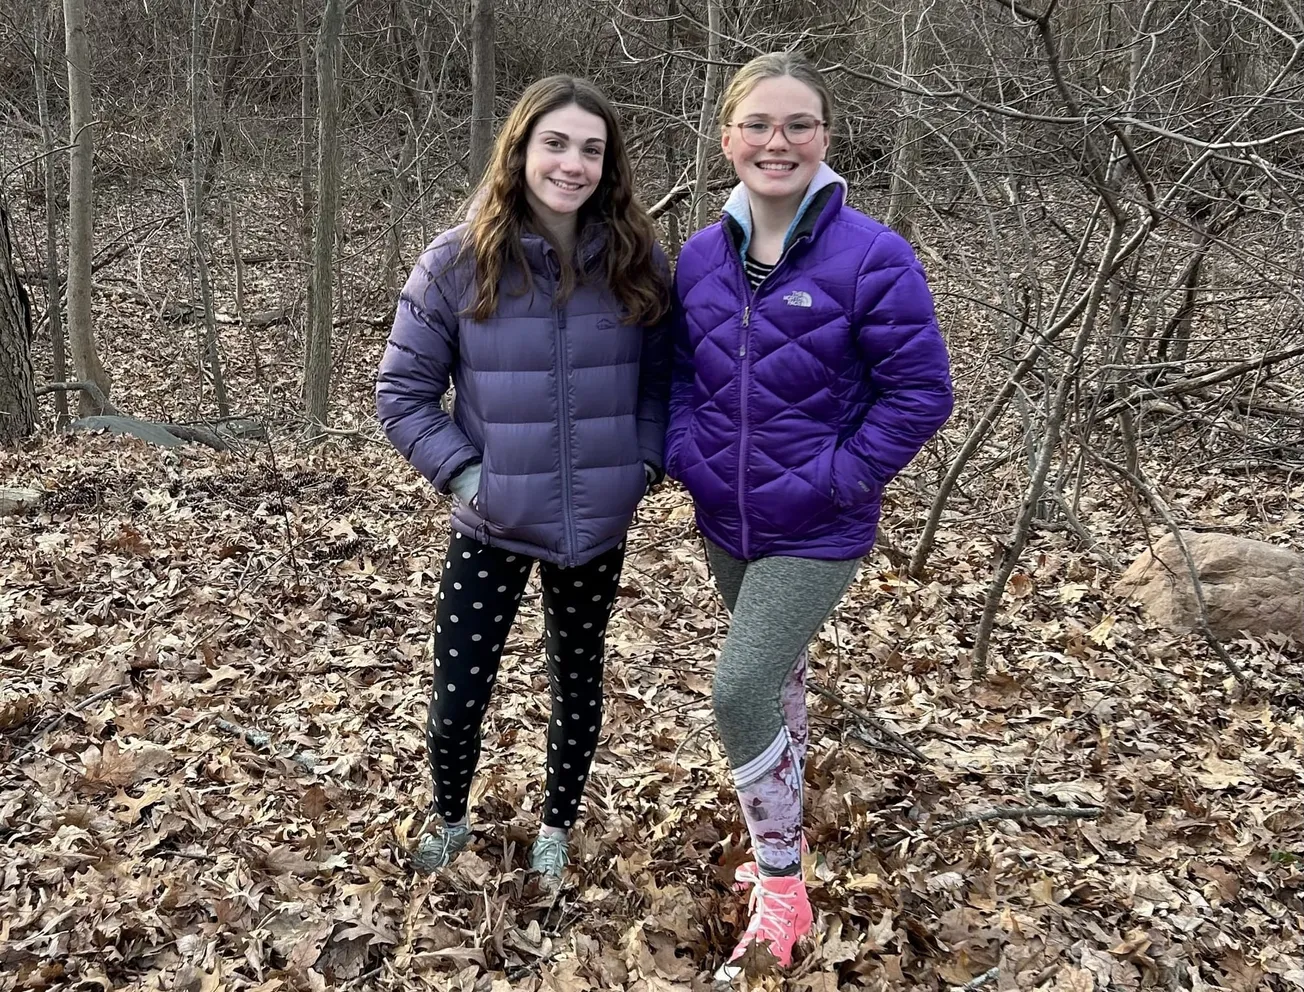 Helpers Among Us: Middle schoolers clean up the woods